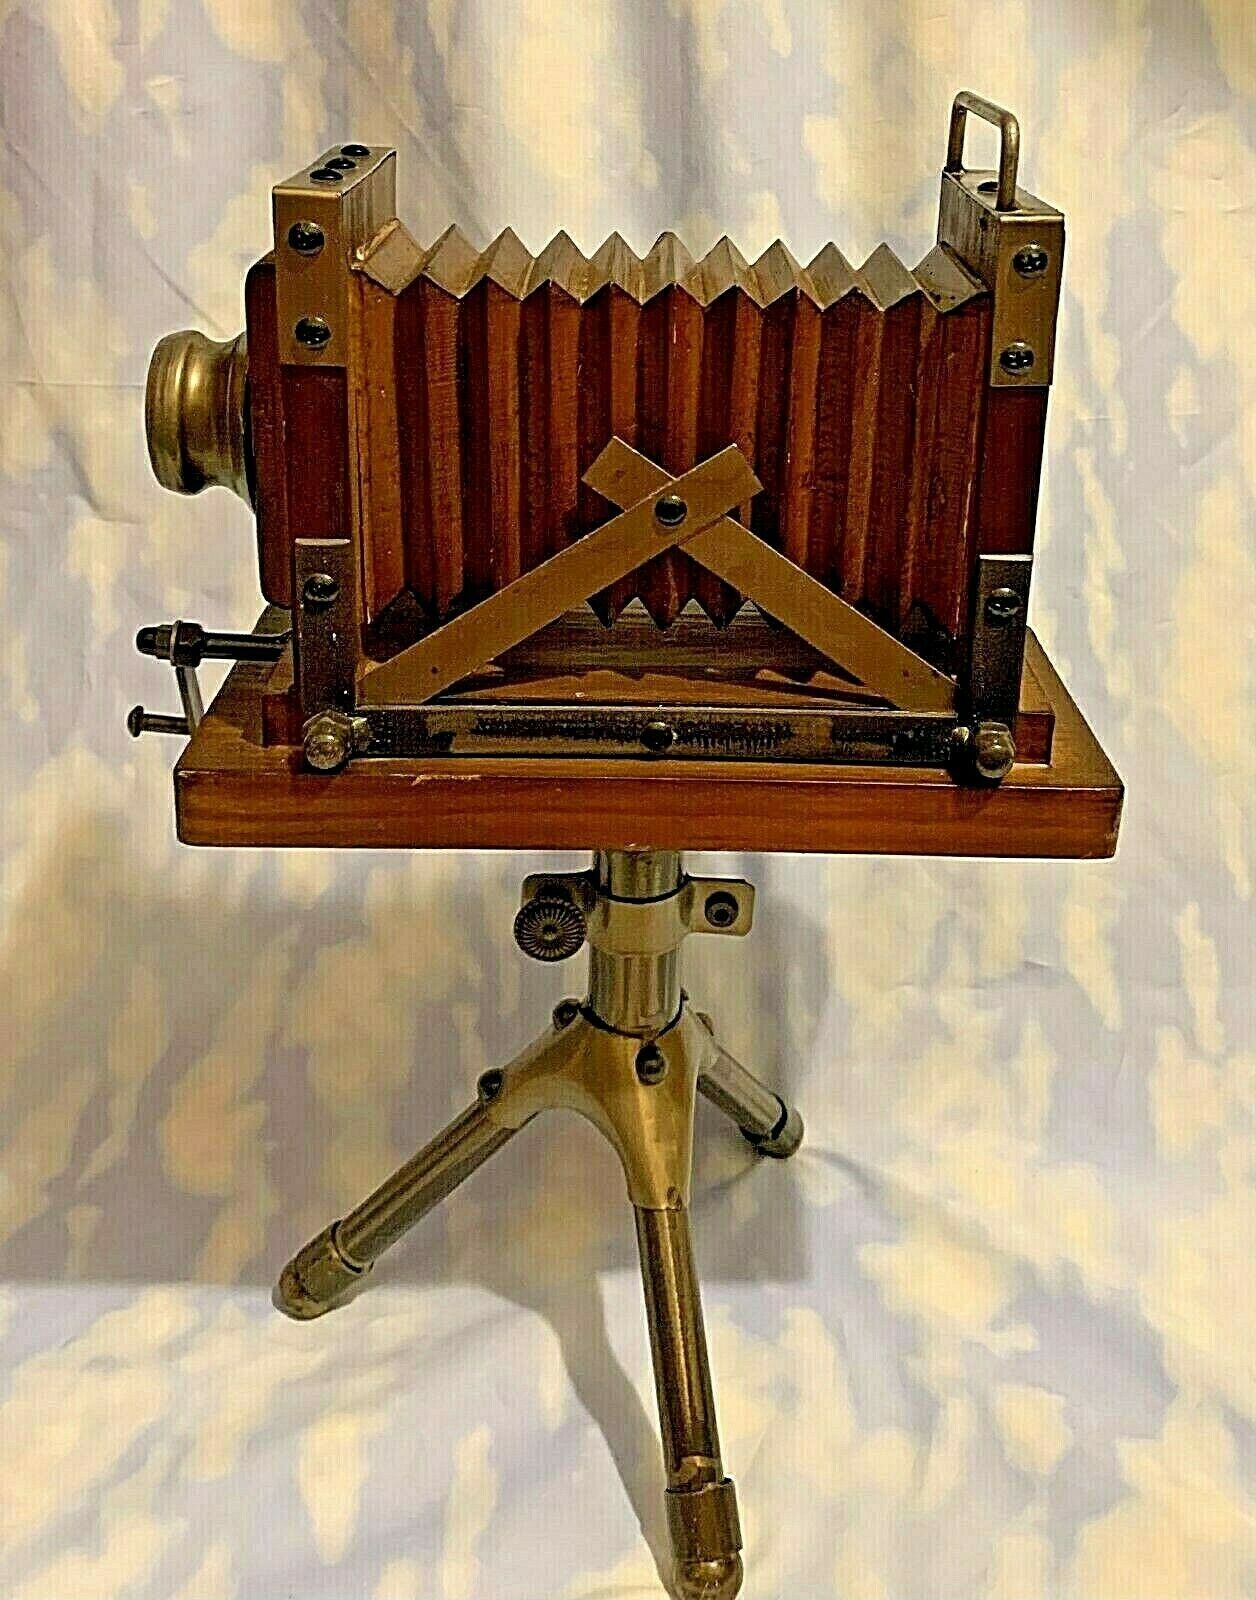 Vintage Antique Decorative Old Look Camera on Wooden Tripod Stand, Studio Gift